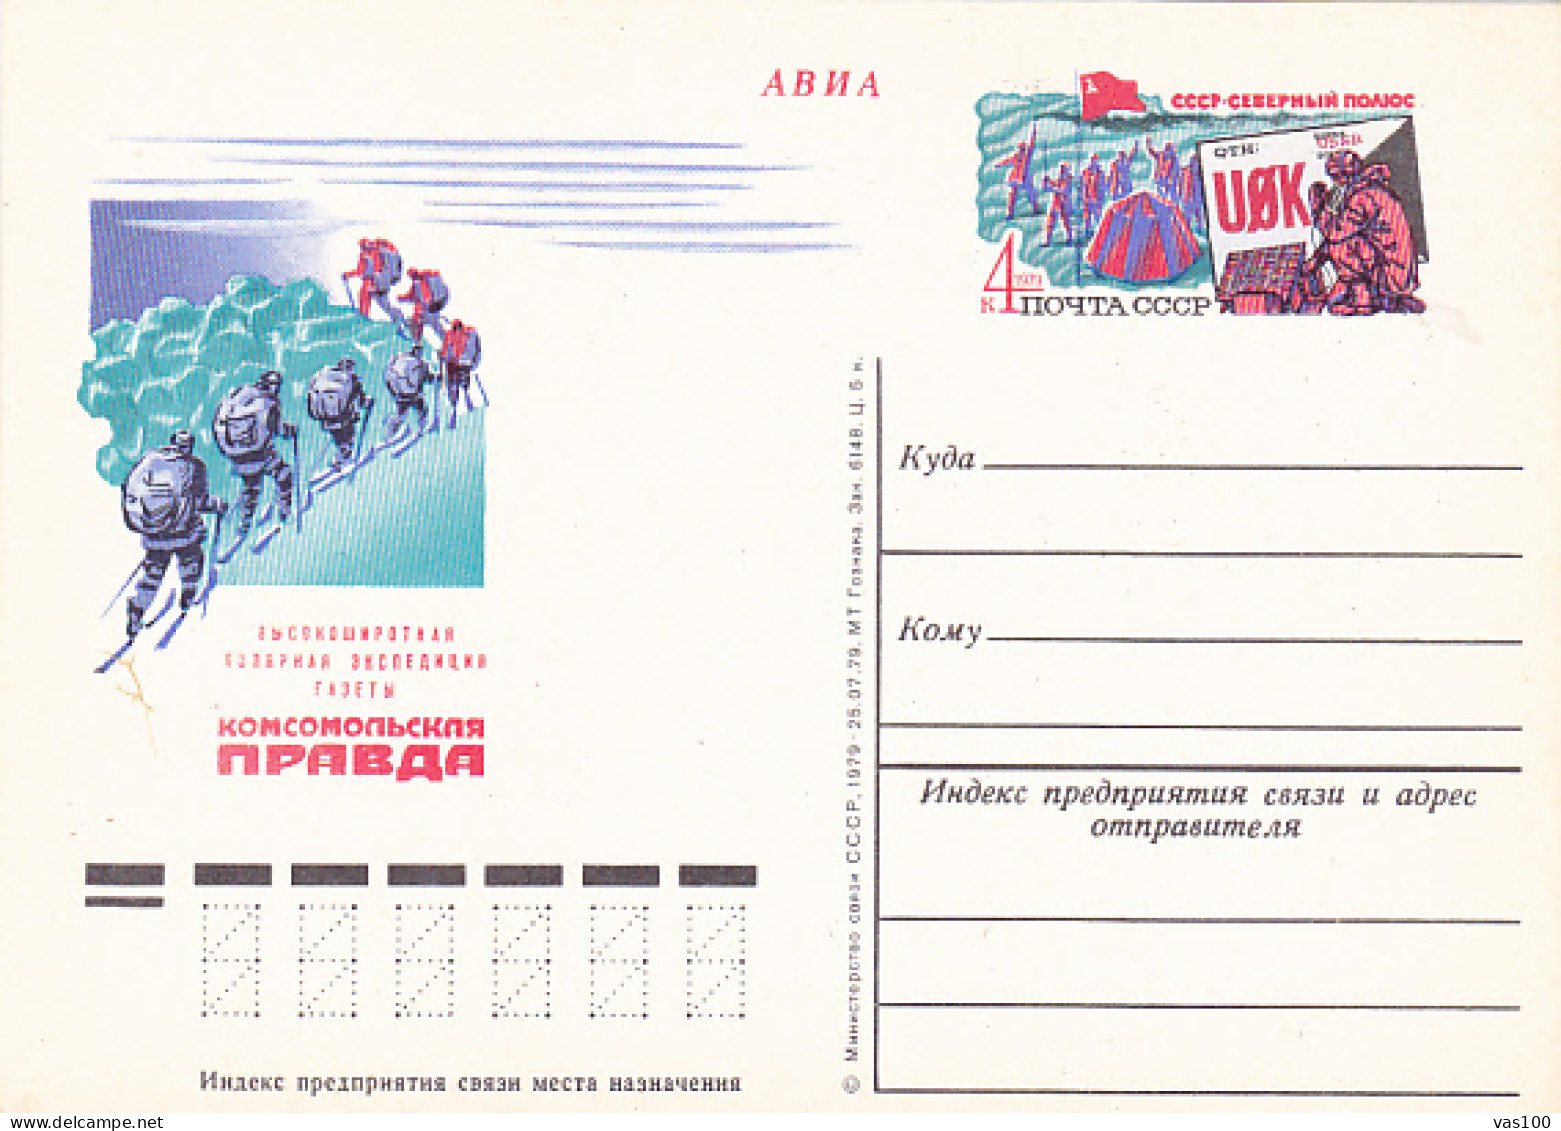 NORTH POLE, PRAVDA NEWSPAPER RUSSIAN ARCTIC EXPEDITION, PC STATIONERY, ENTIER POSTAL, 1979, RUSSIA - Arktis Expeditionen